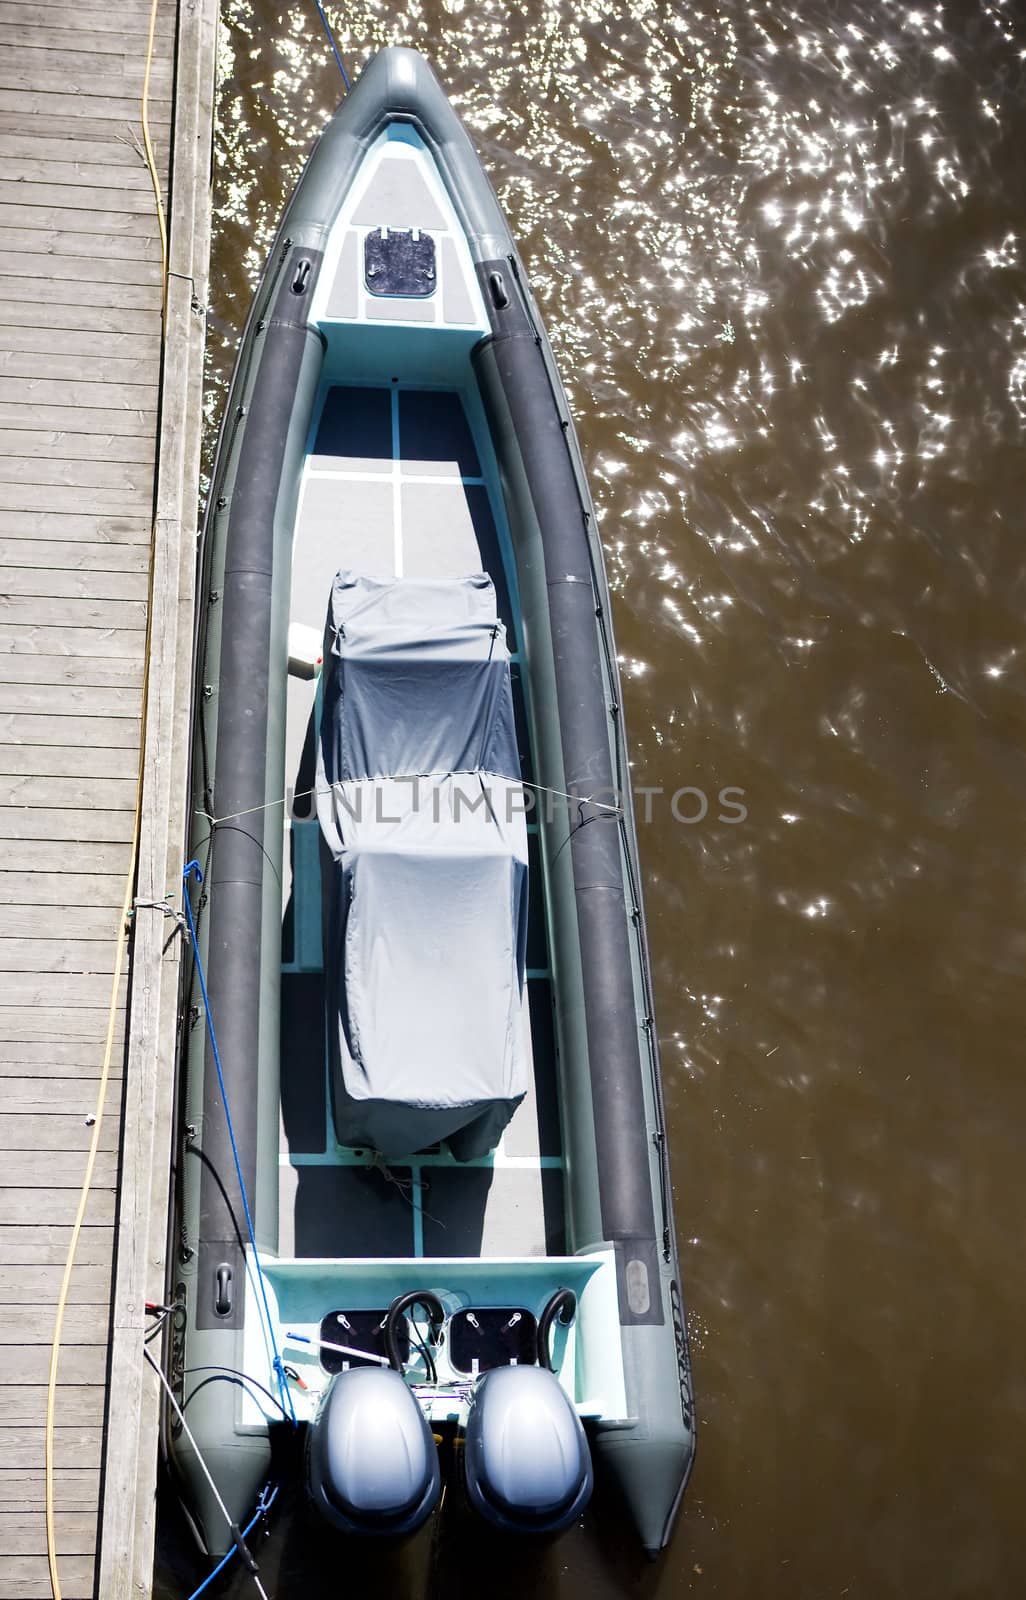 A top view of a speed boat at dock